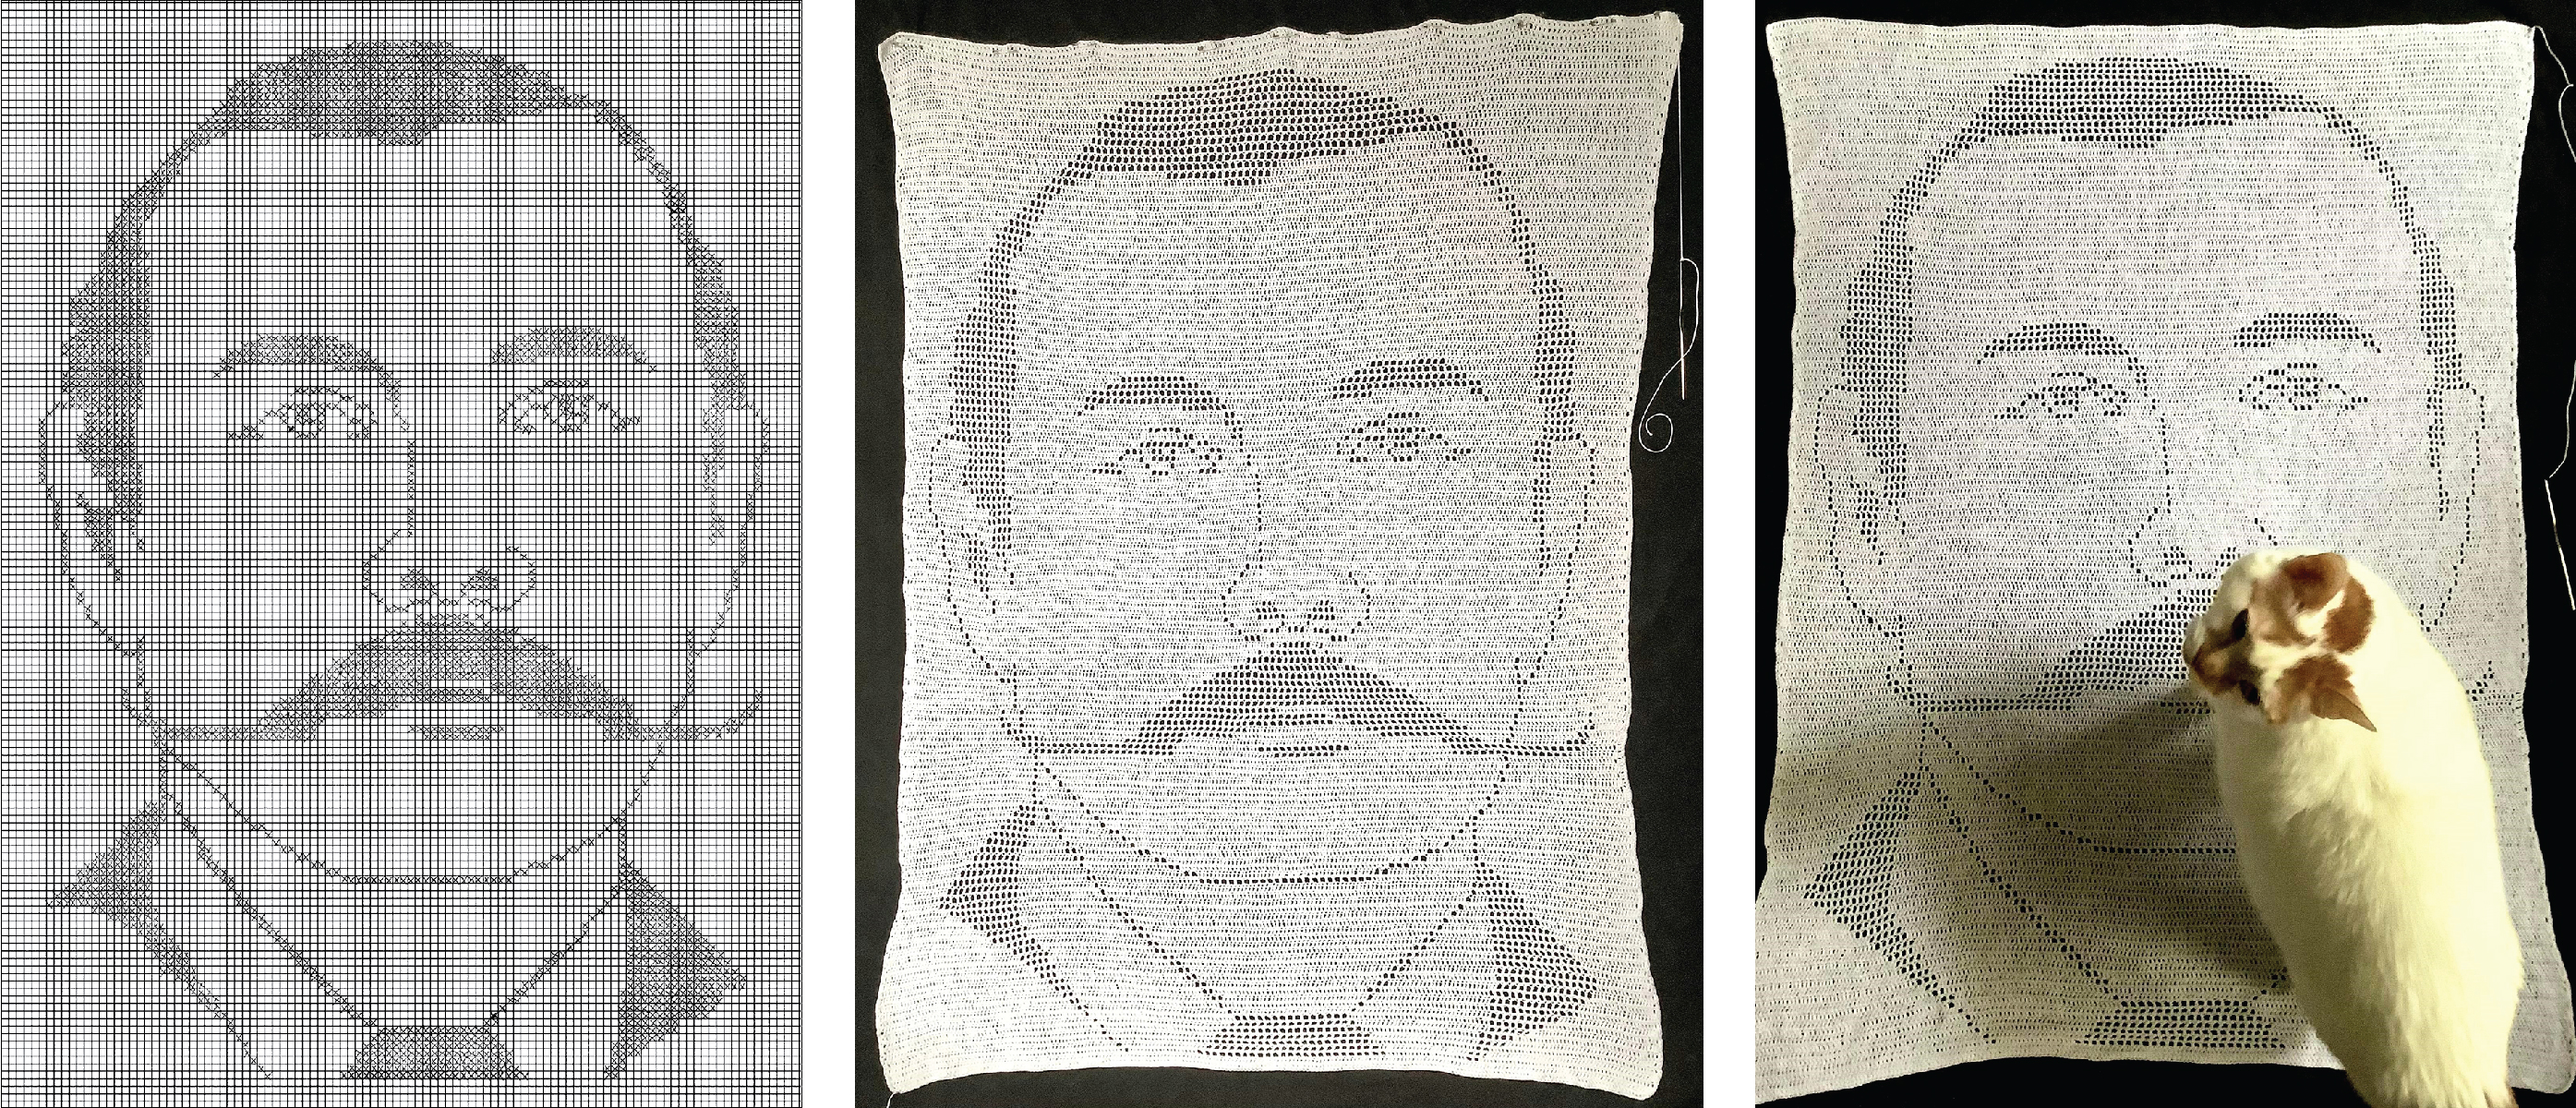 3 images of Peggy's Arthur Conan Doyle doily, with her cat